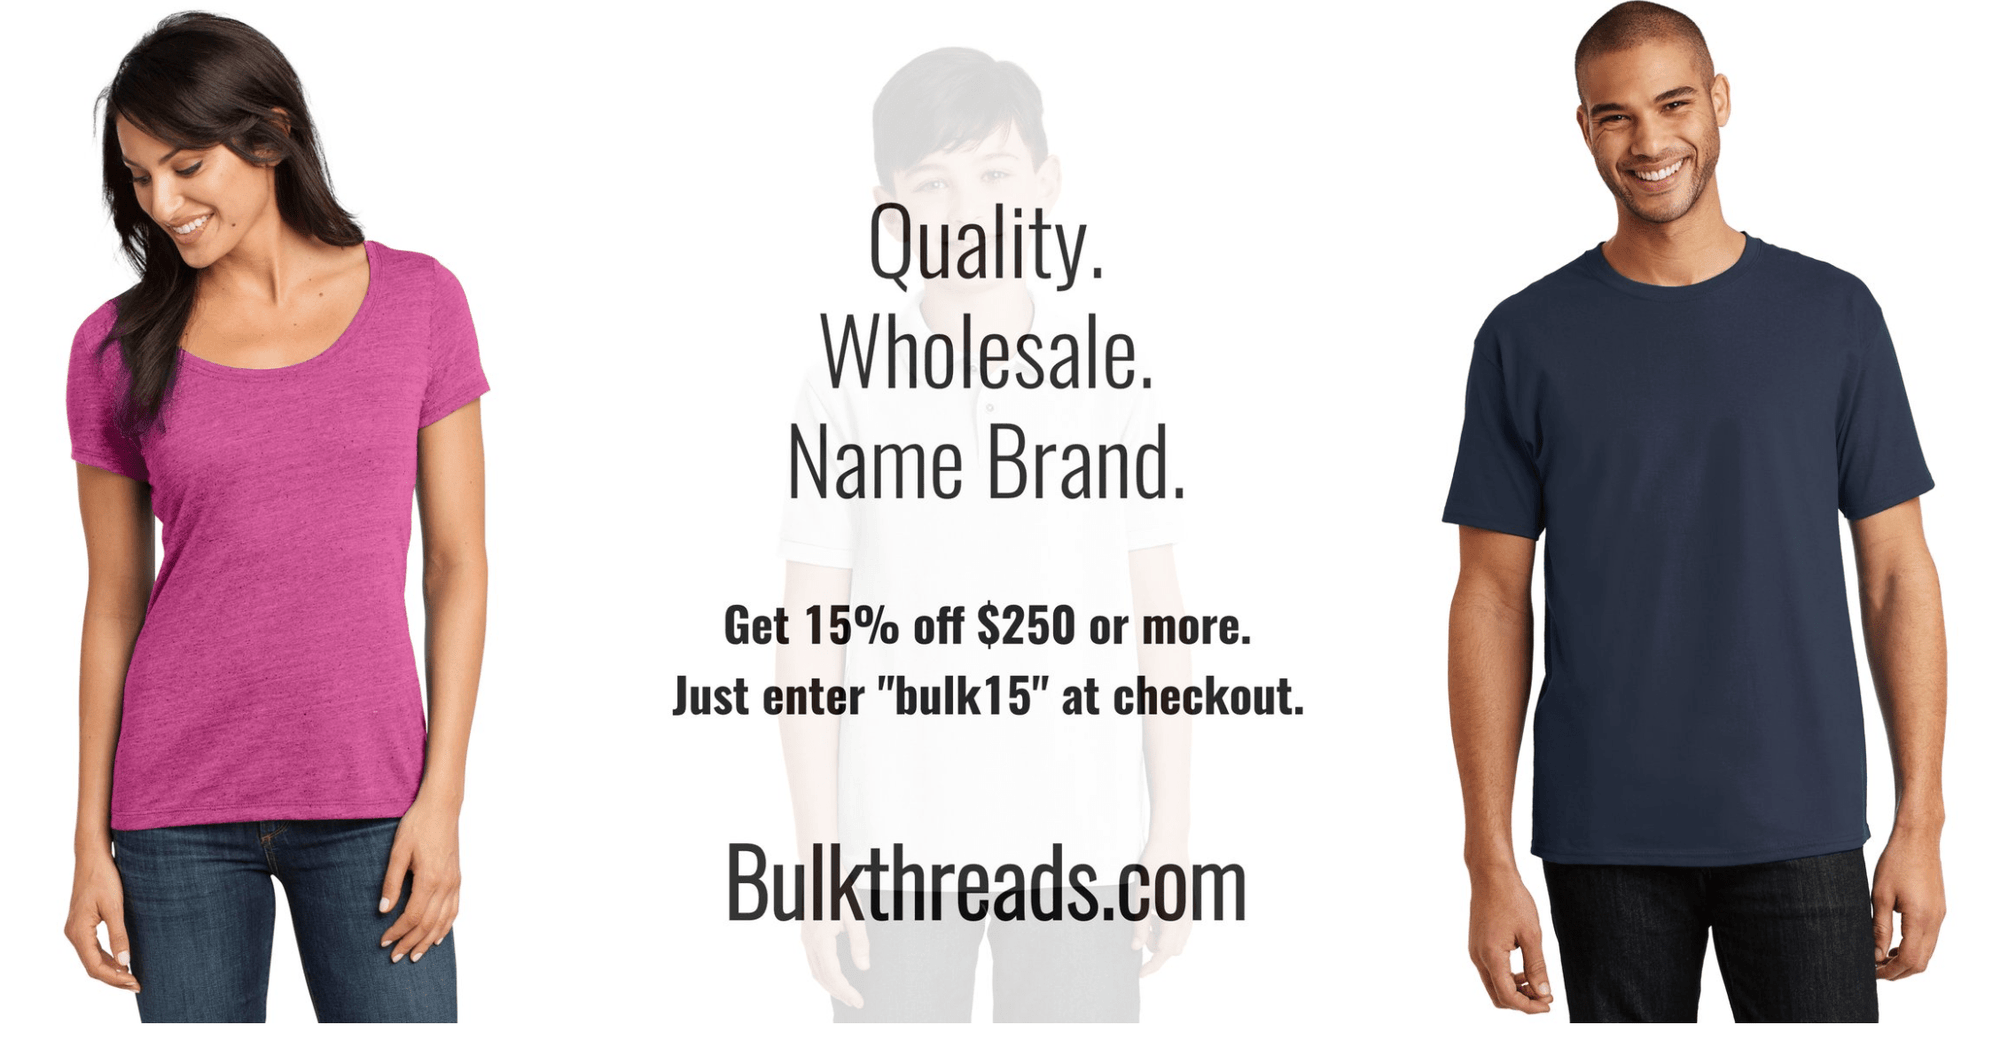 Blank wholesale t-shirts. T-Shirts online. Cheap tees. t-shirts for businesses. T-shirts for printing. Wholesale blank tees.